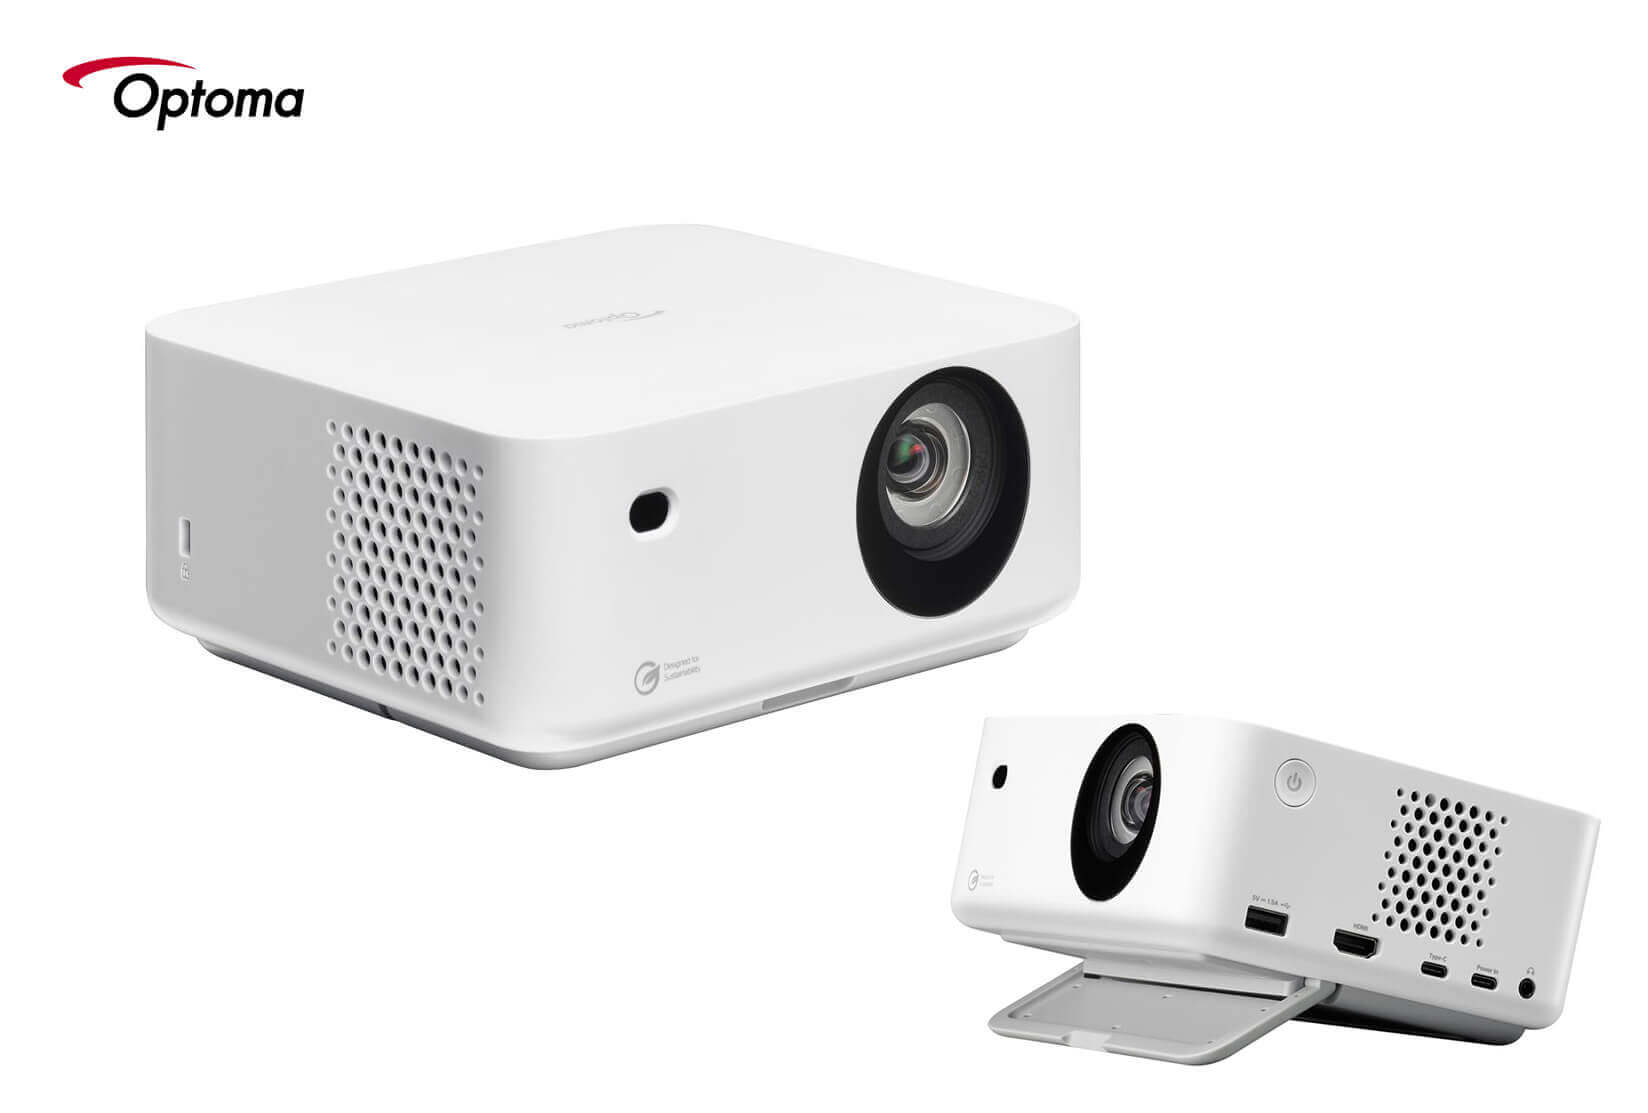 Videoproiector Laser OPTOMA ML1080 Ultracompact, FHD 1920 x 1080, 1200 lumeni, contrast 3.000.000:1